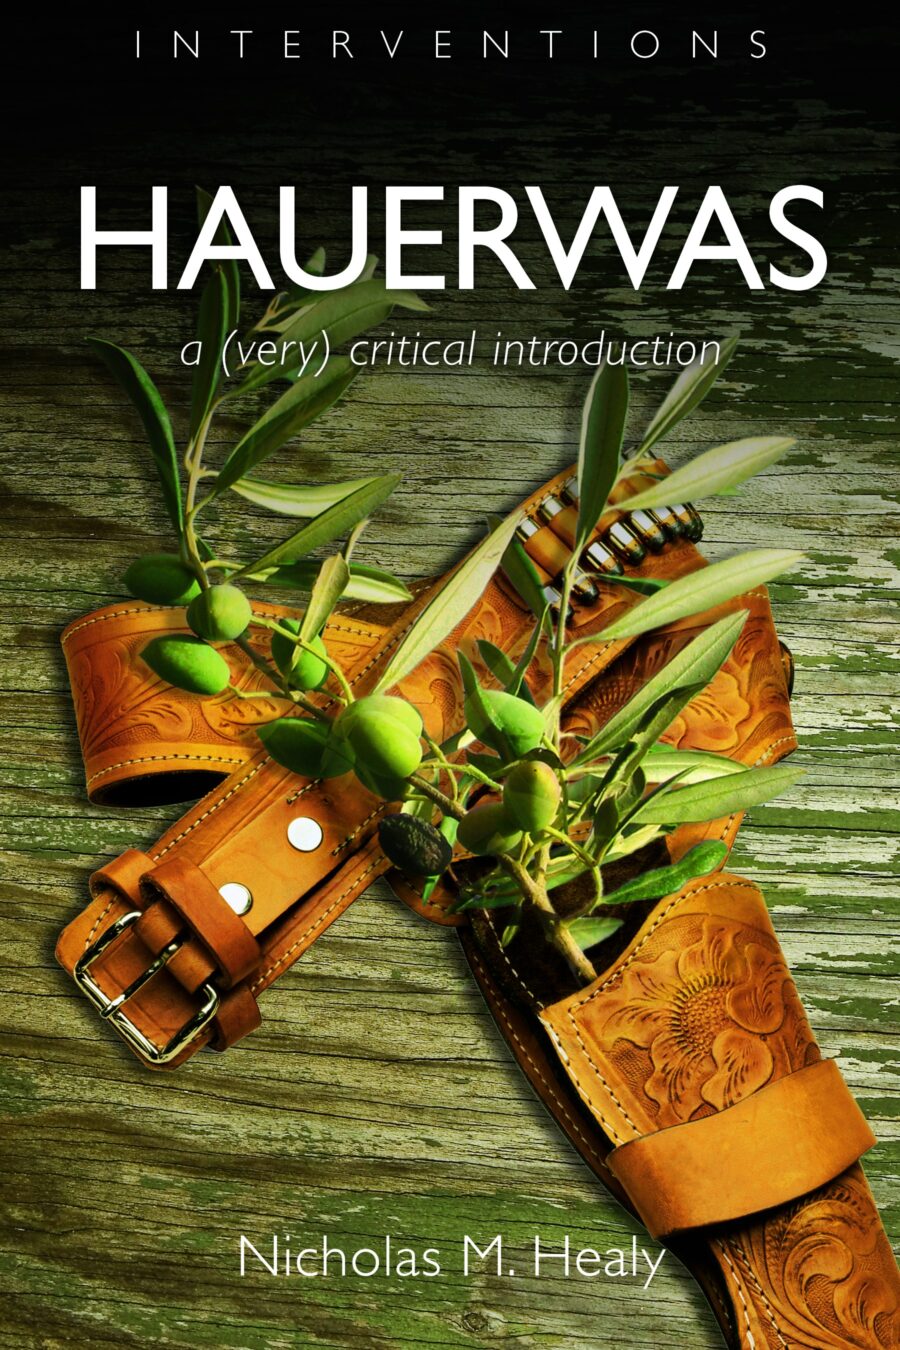 Review of Hauerwas: A (Very) Critical Introduction by Nicholas M. Healy